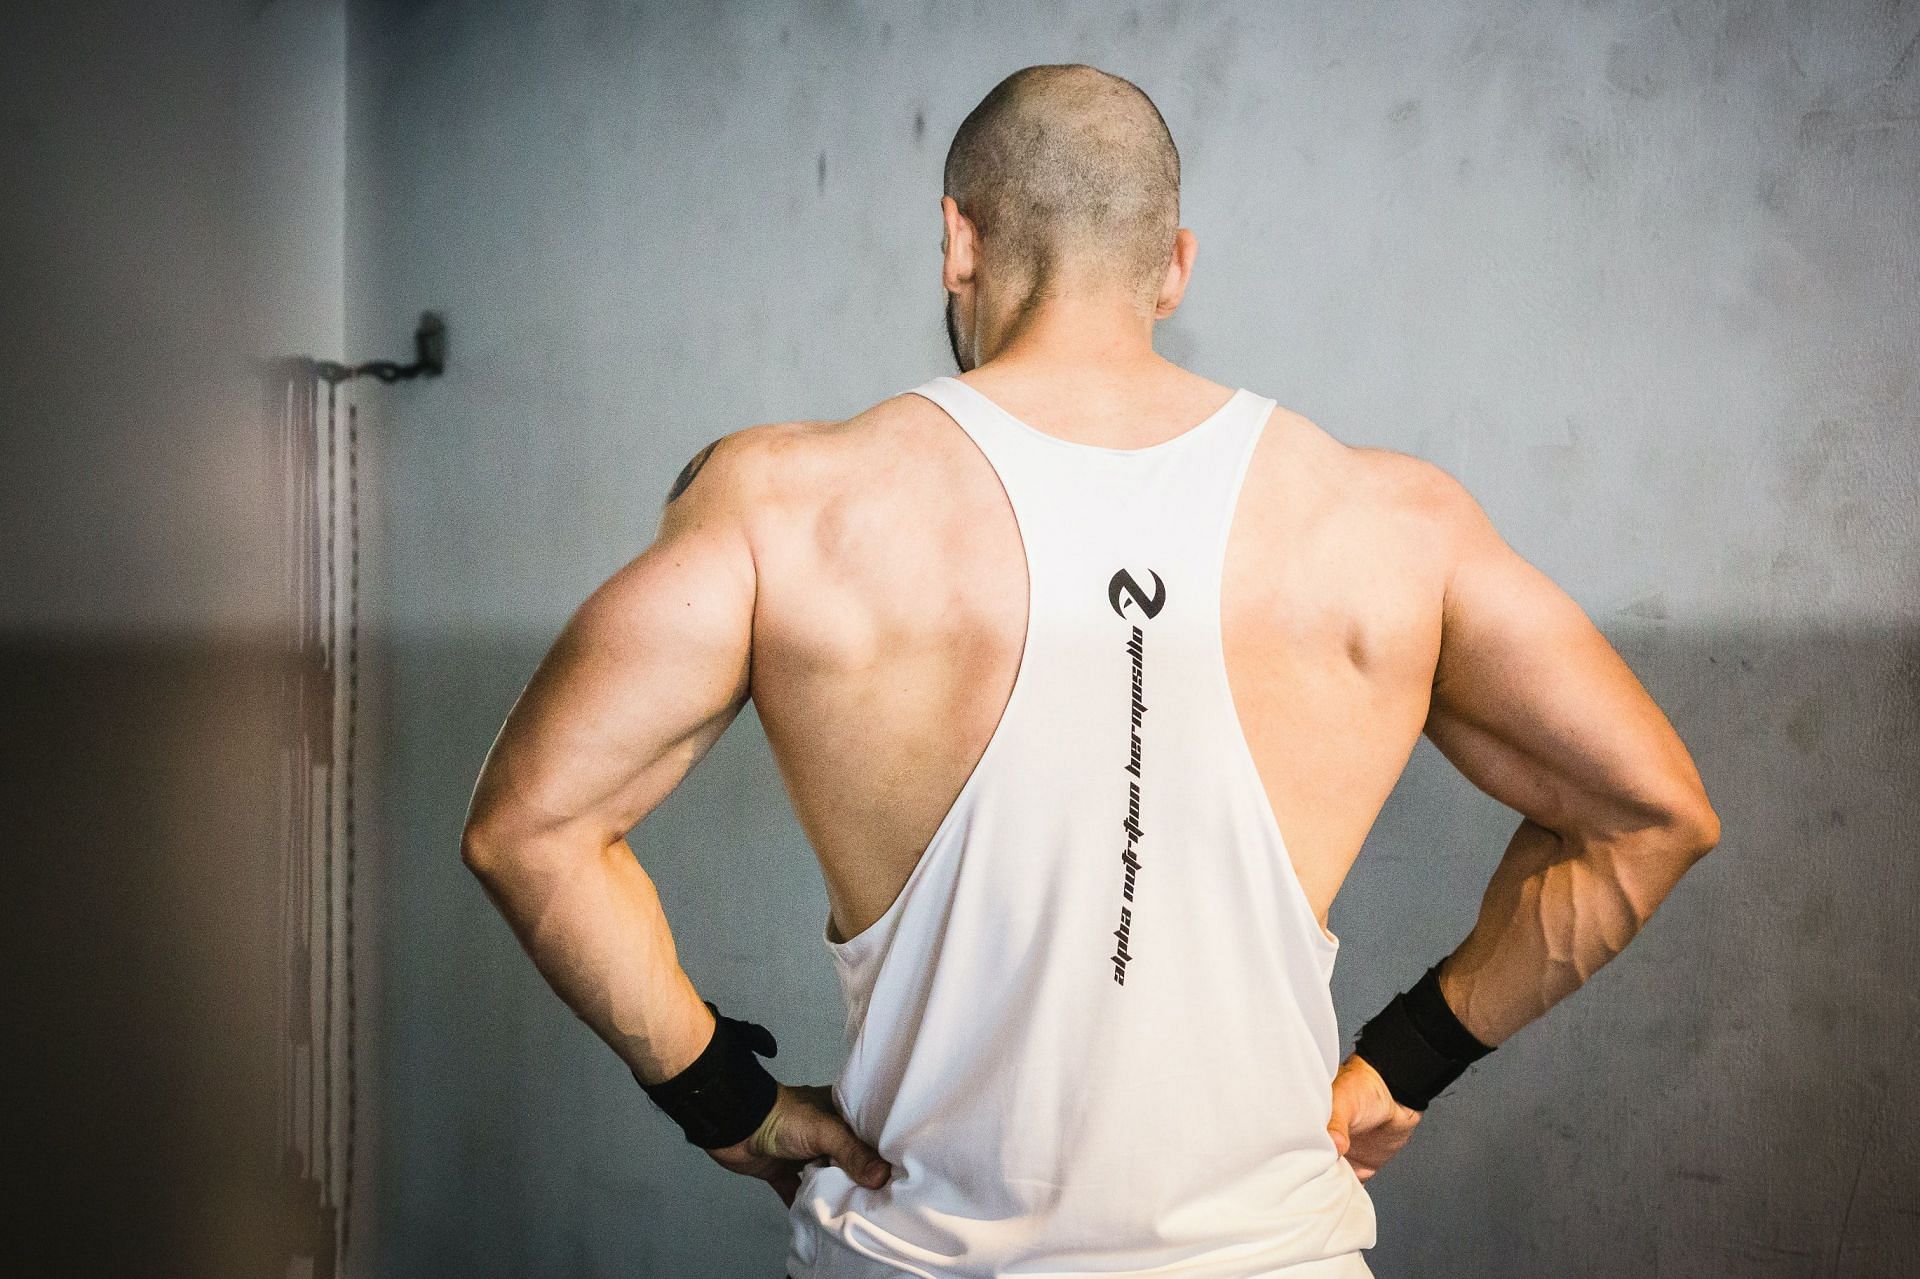 Deltoid exercises can help you get that V-shaped muscular look (Image via Pexels @Mario Valenzuela) 